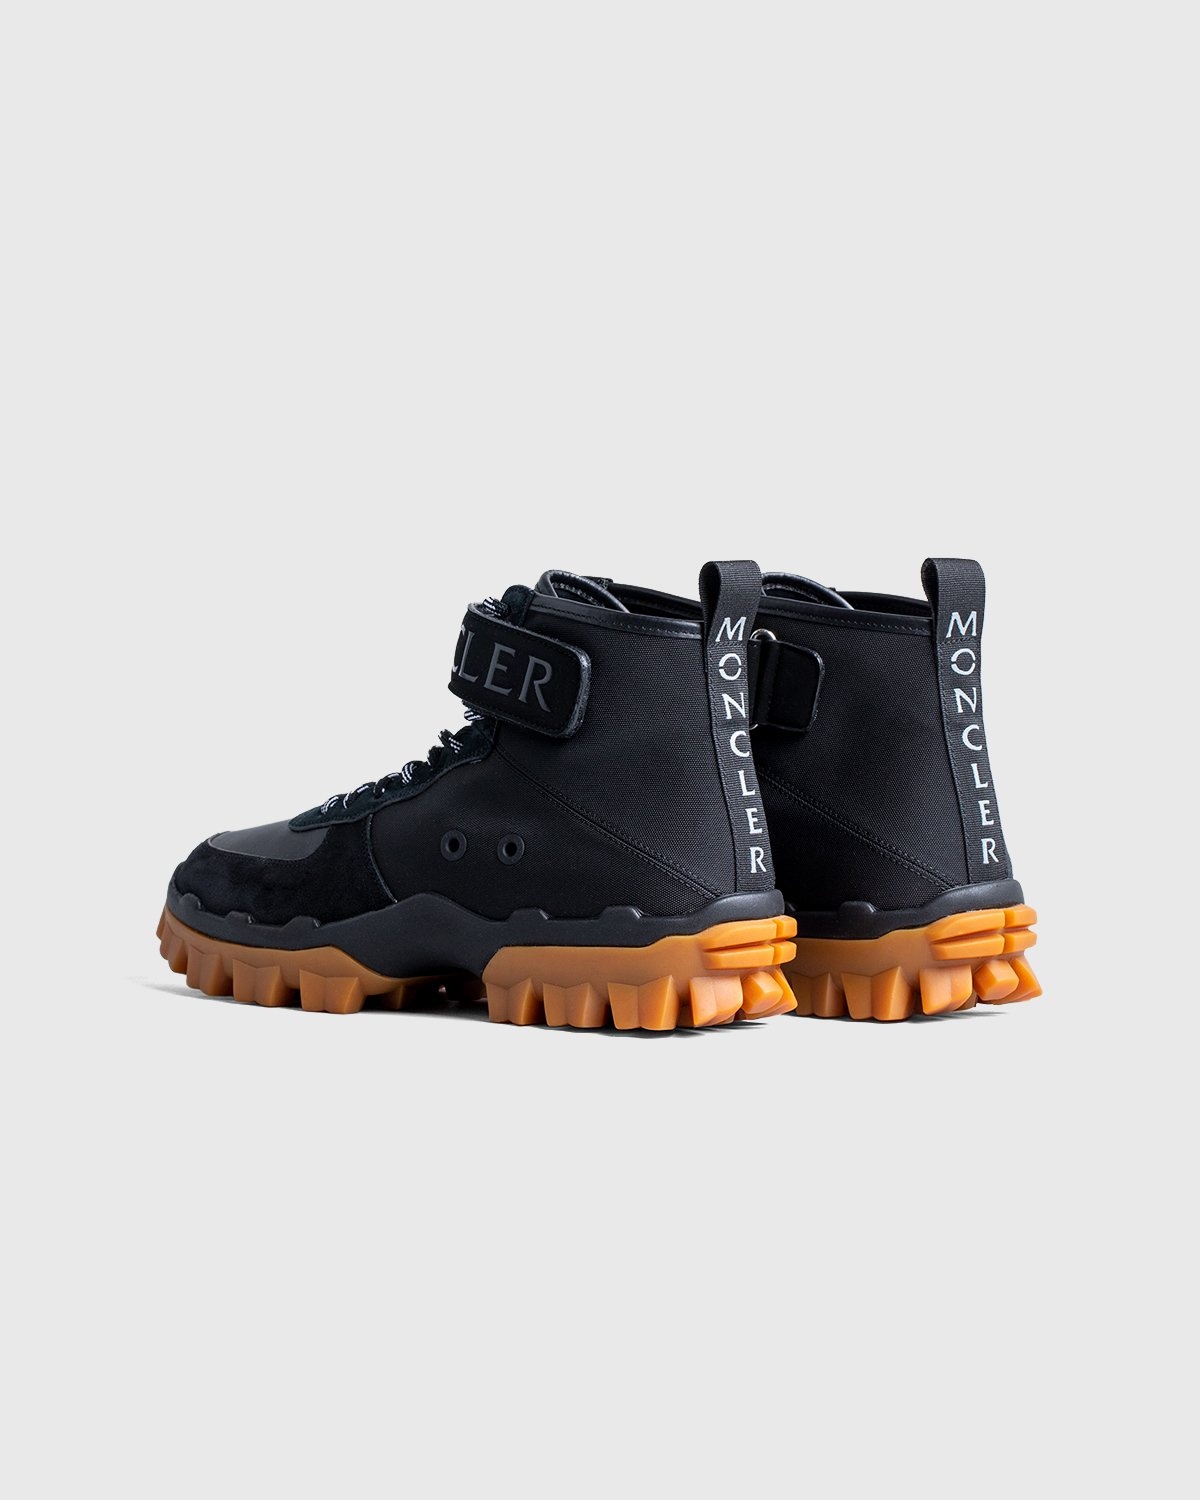 Moncler Genius – Recycled Hugo Shoes - Hiking Boots - Black - Image 4